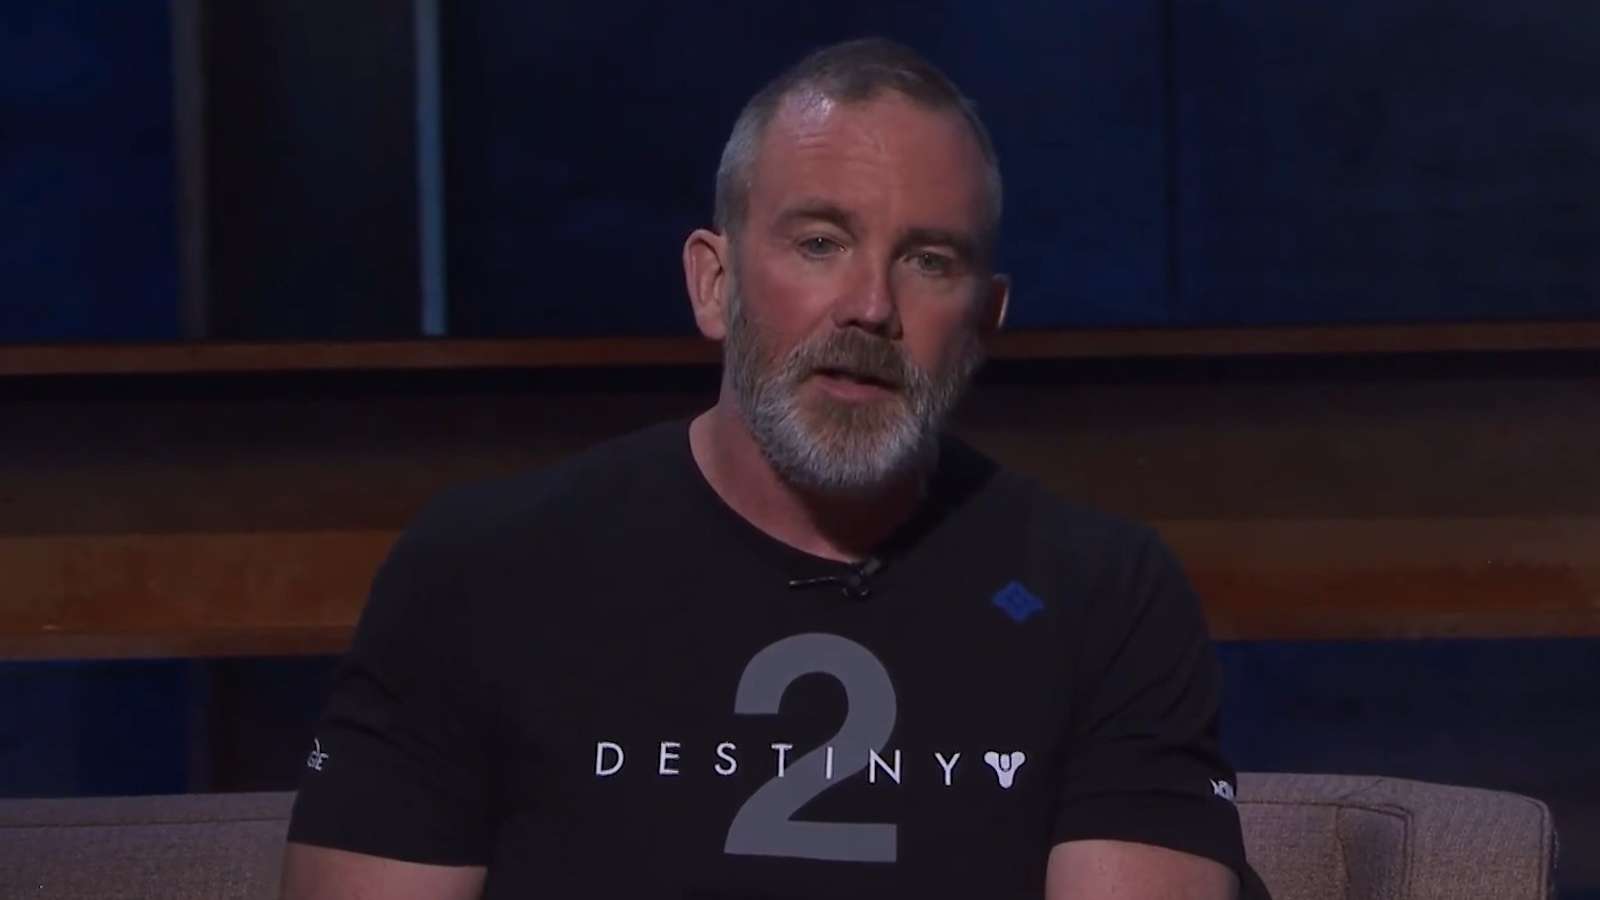 Bungie CEO Pete Parsons showing off new Destiny 2 Exotic weapon during E3 2017.